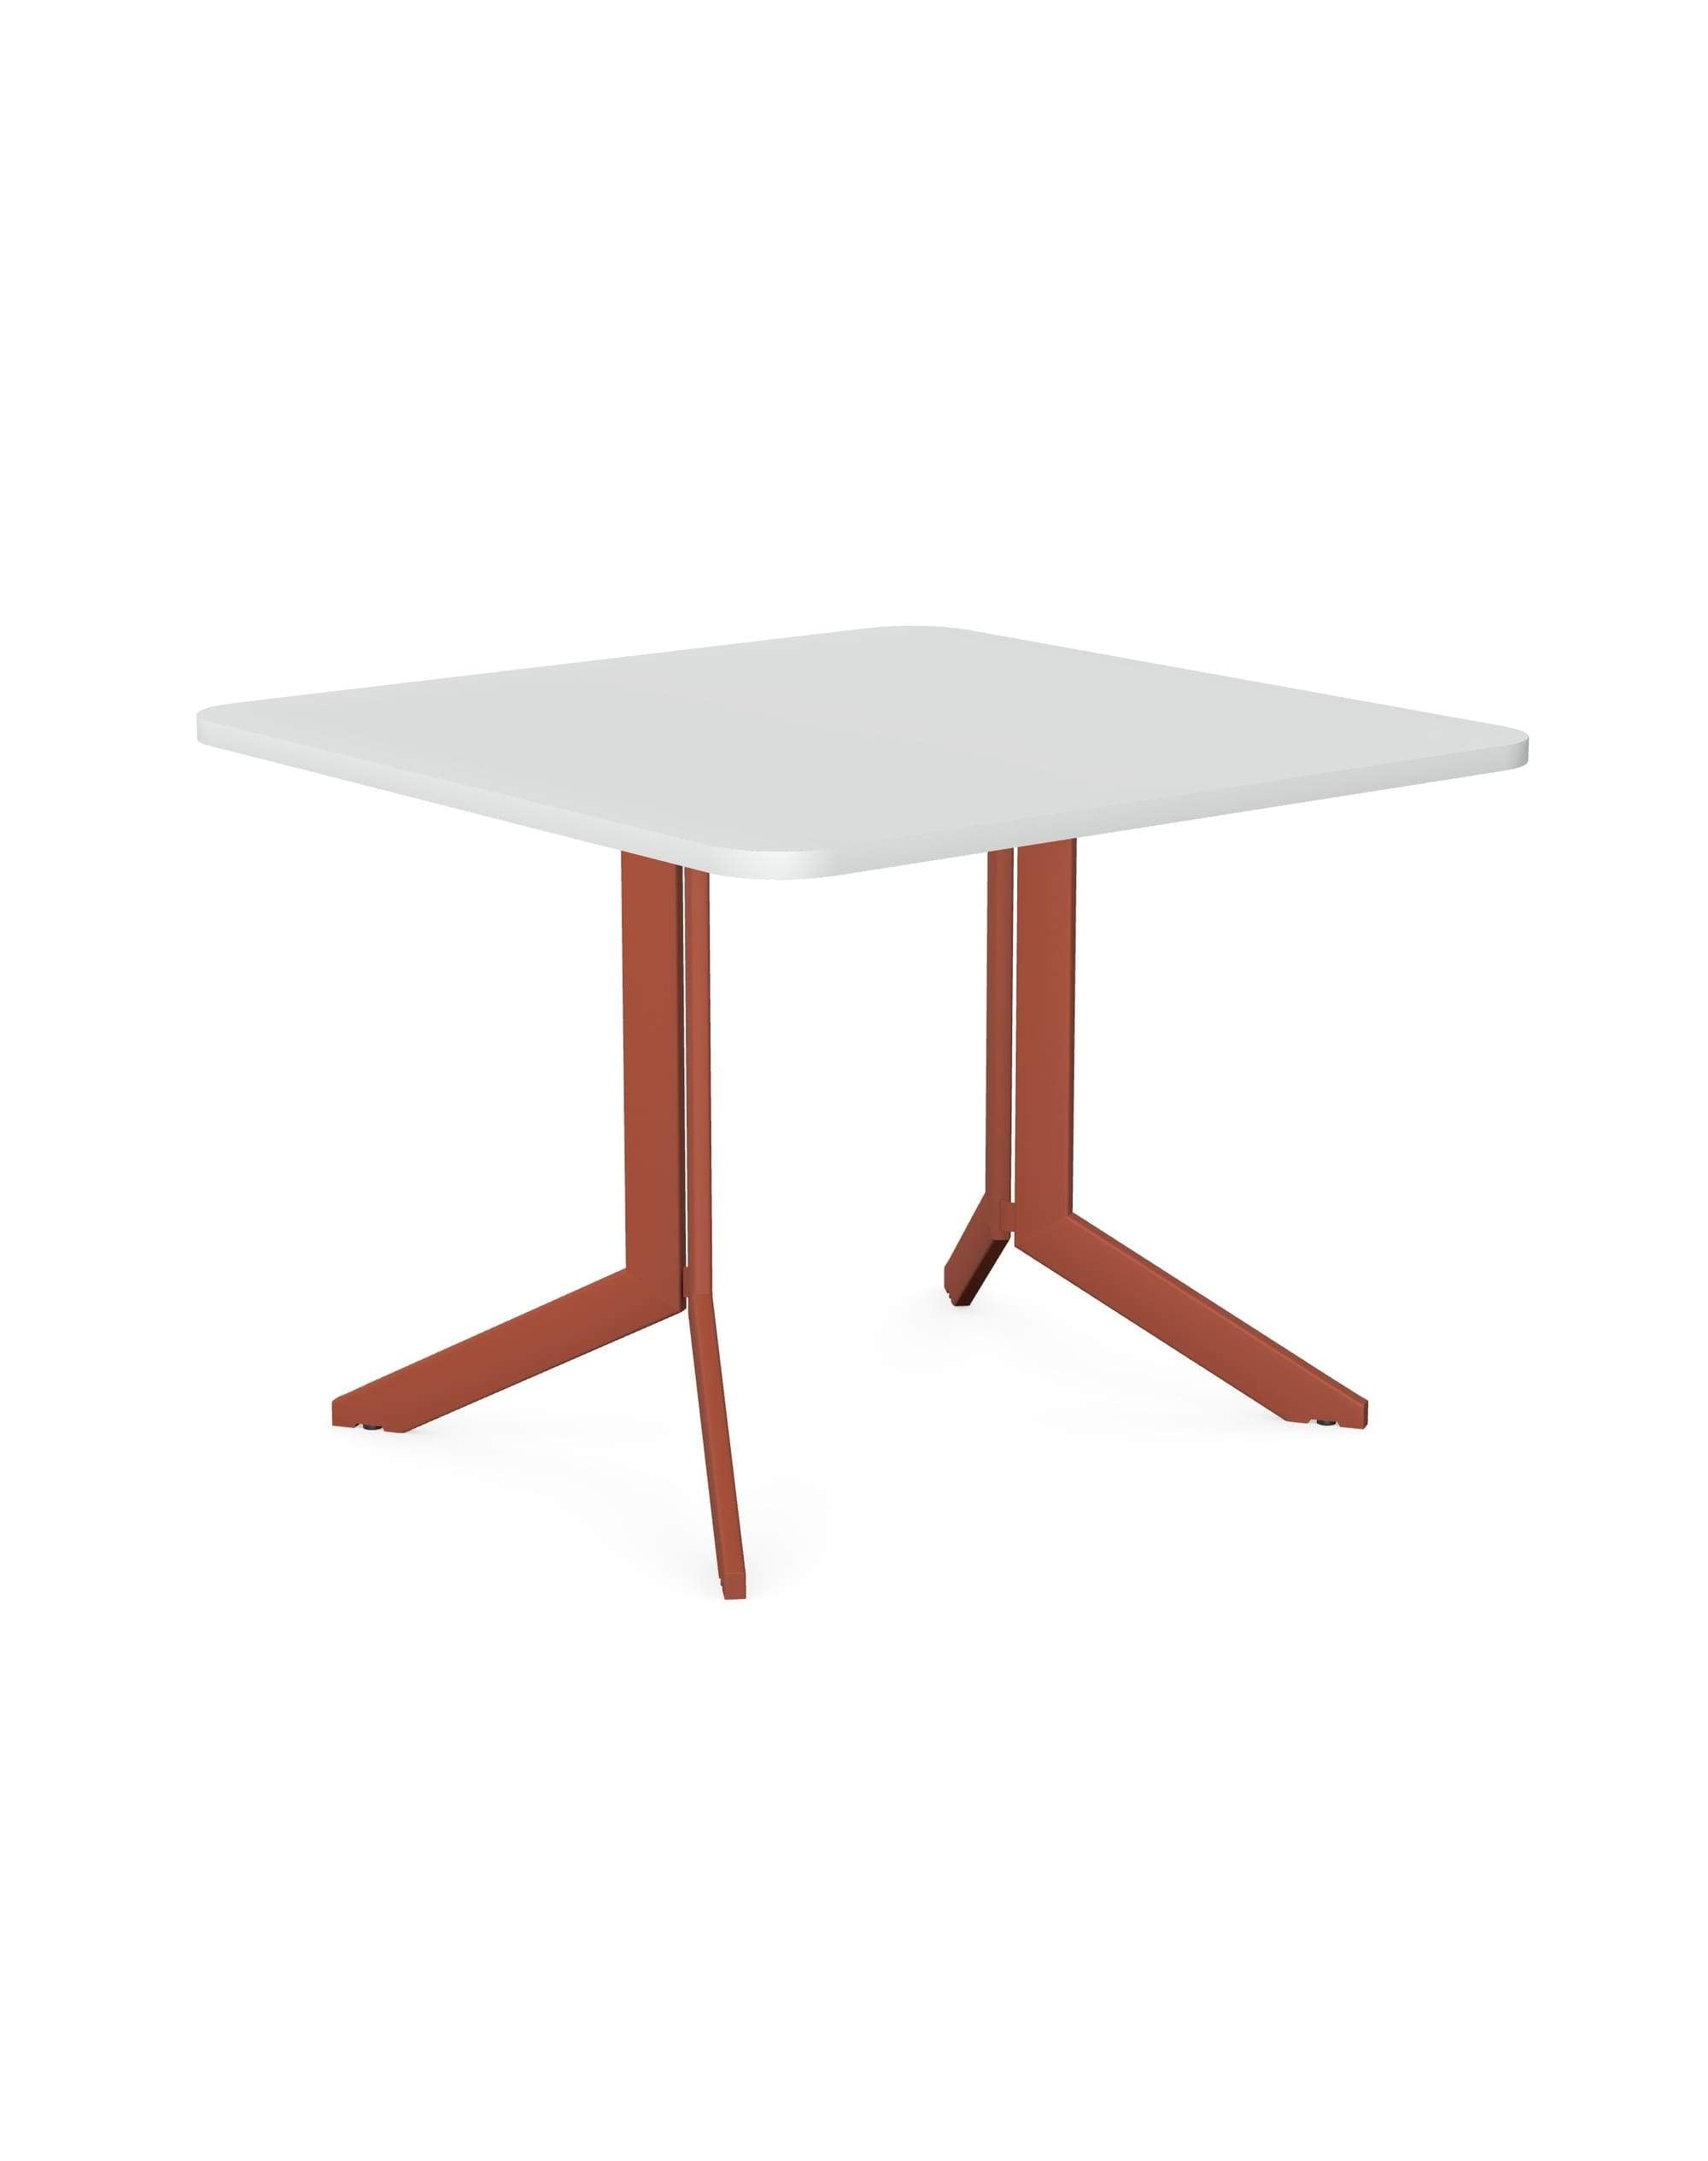 Axy-Line - Occasional Tables, Squared Tops, Leg-X